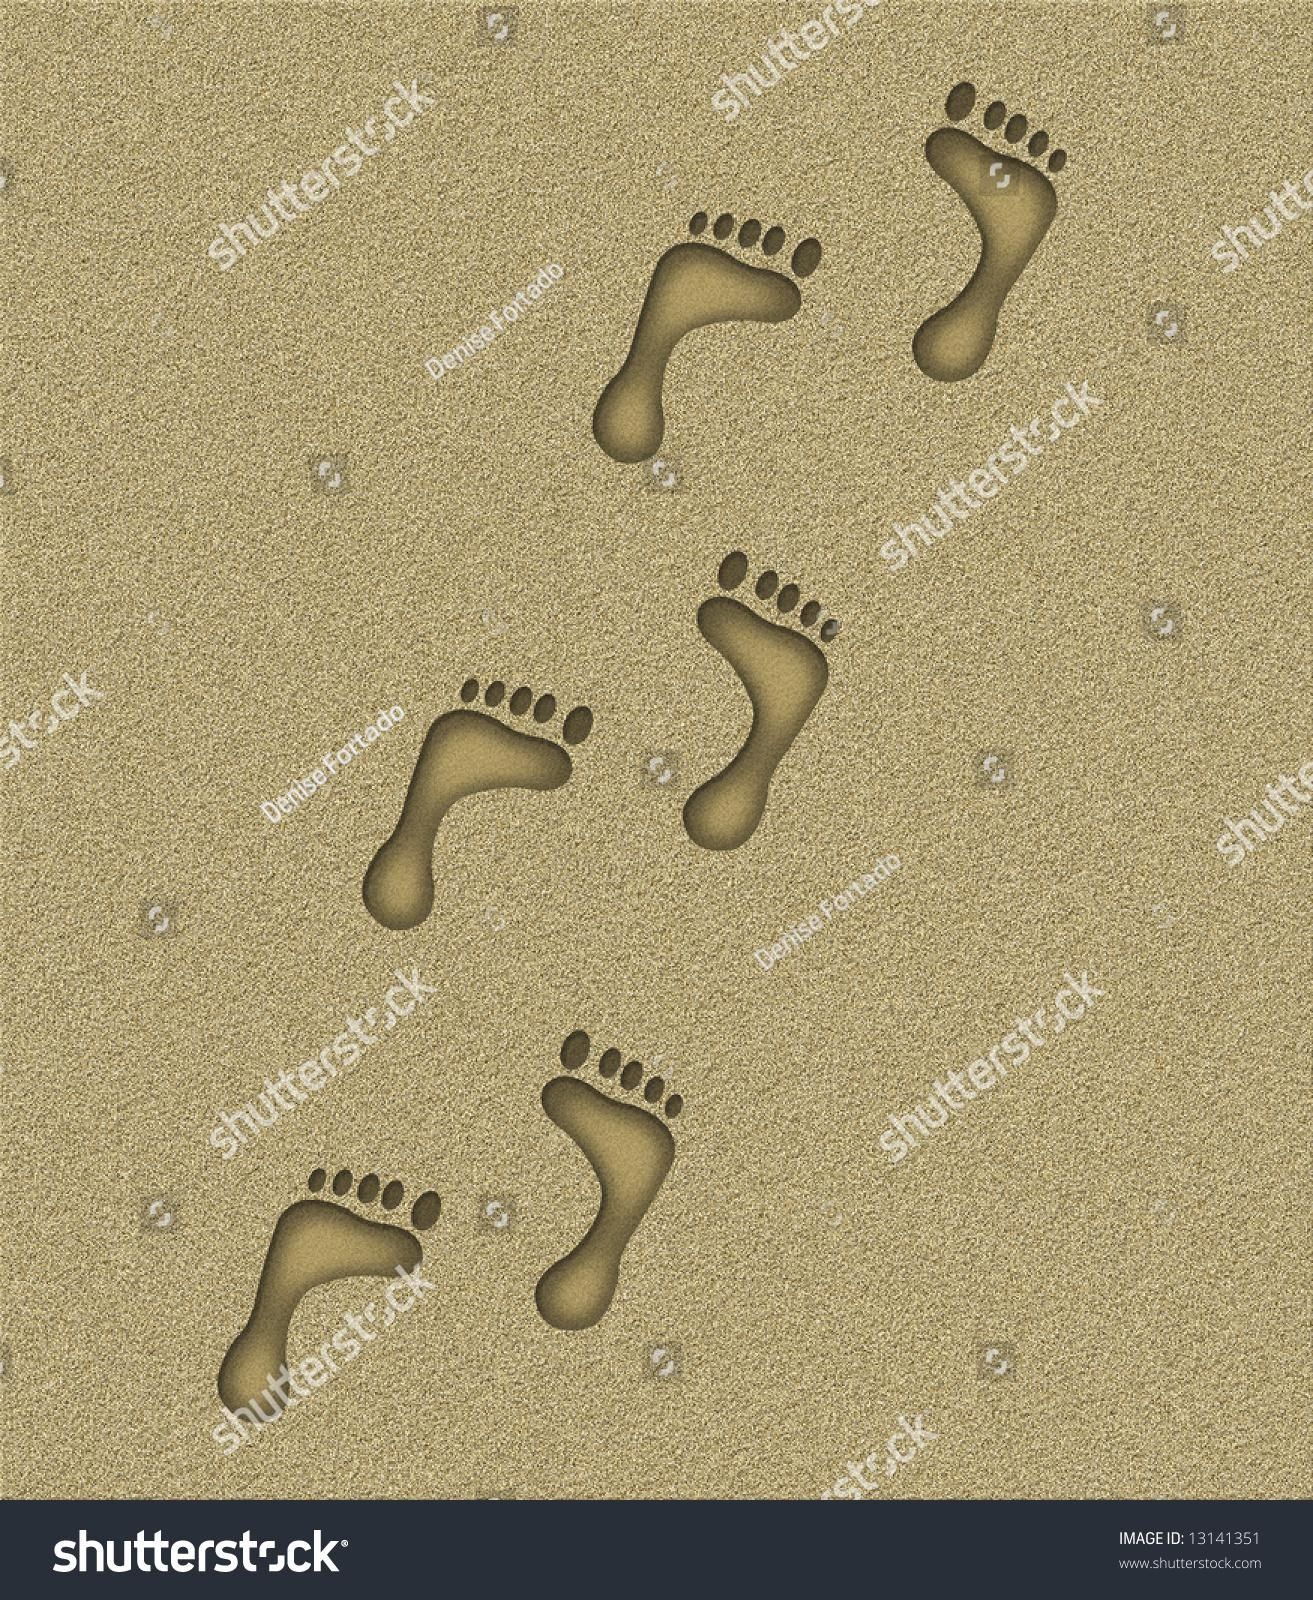 Footprints Sand Stock Illustration 13141351 – Shutterstock With Footprints In The Sand Wall Art (View 16 of 20)